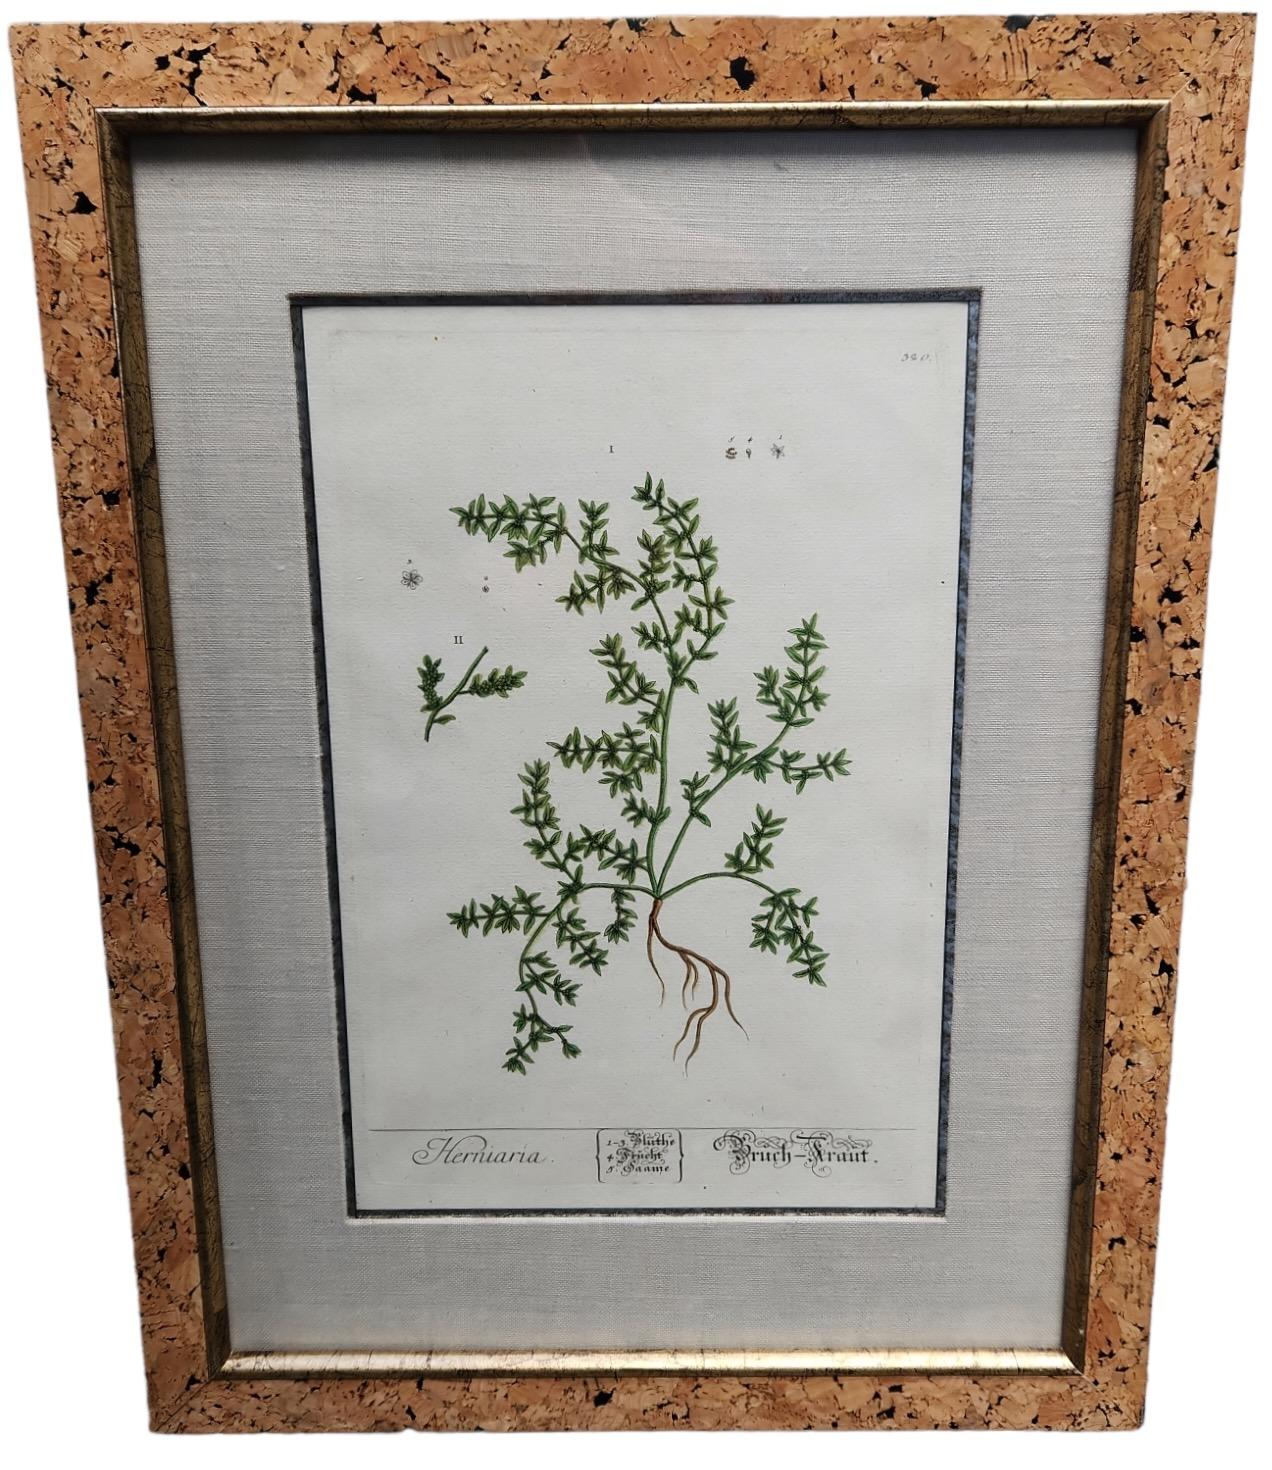 English 18th Century Elizabeth Blackwell Hand Tinted Botanicals - 12 Available For Sale